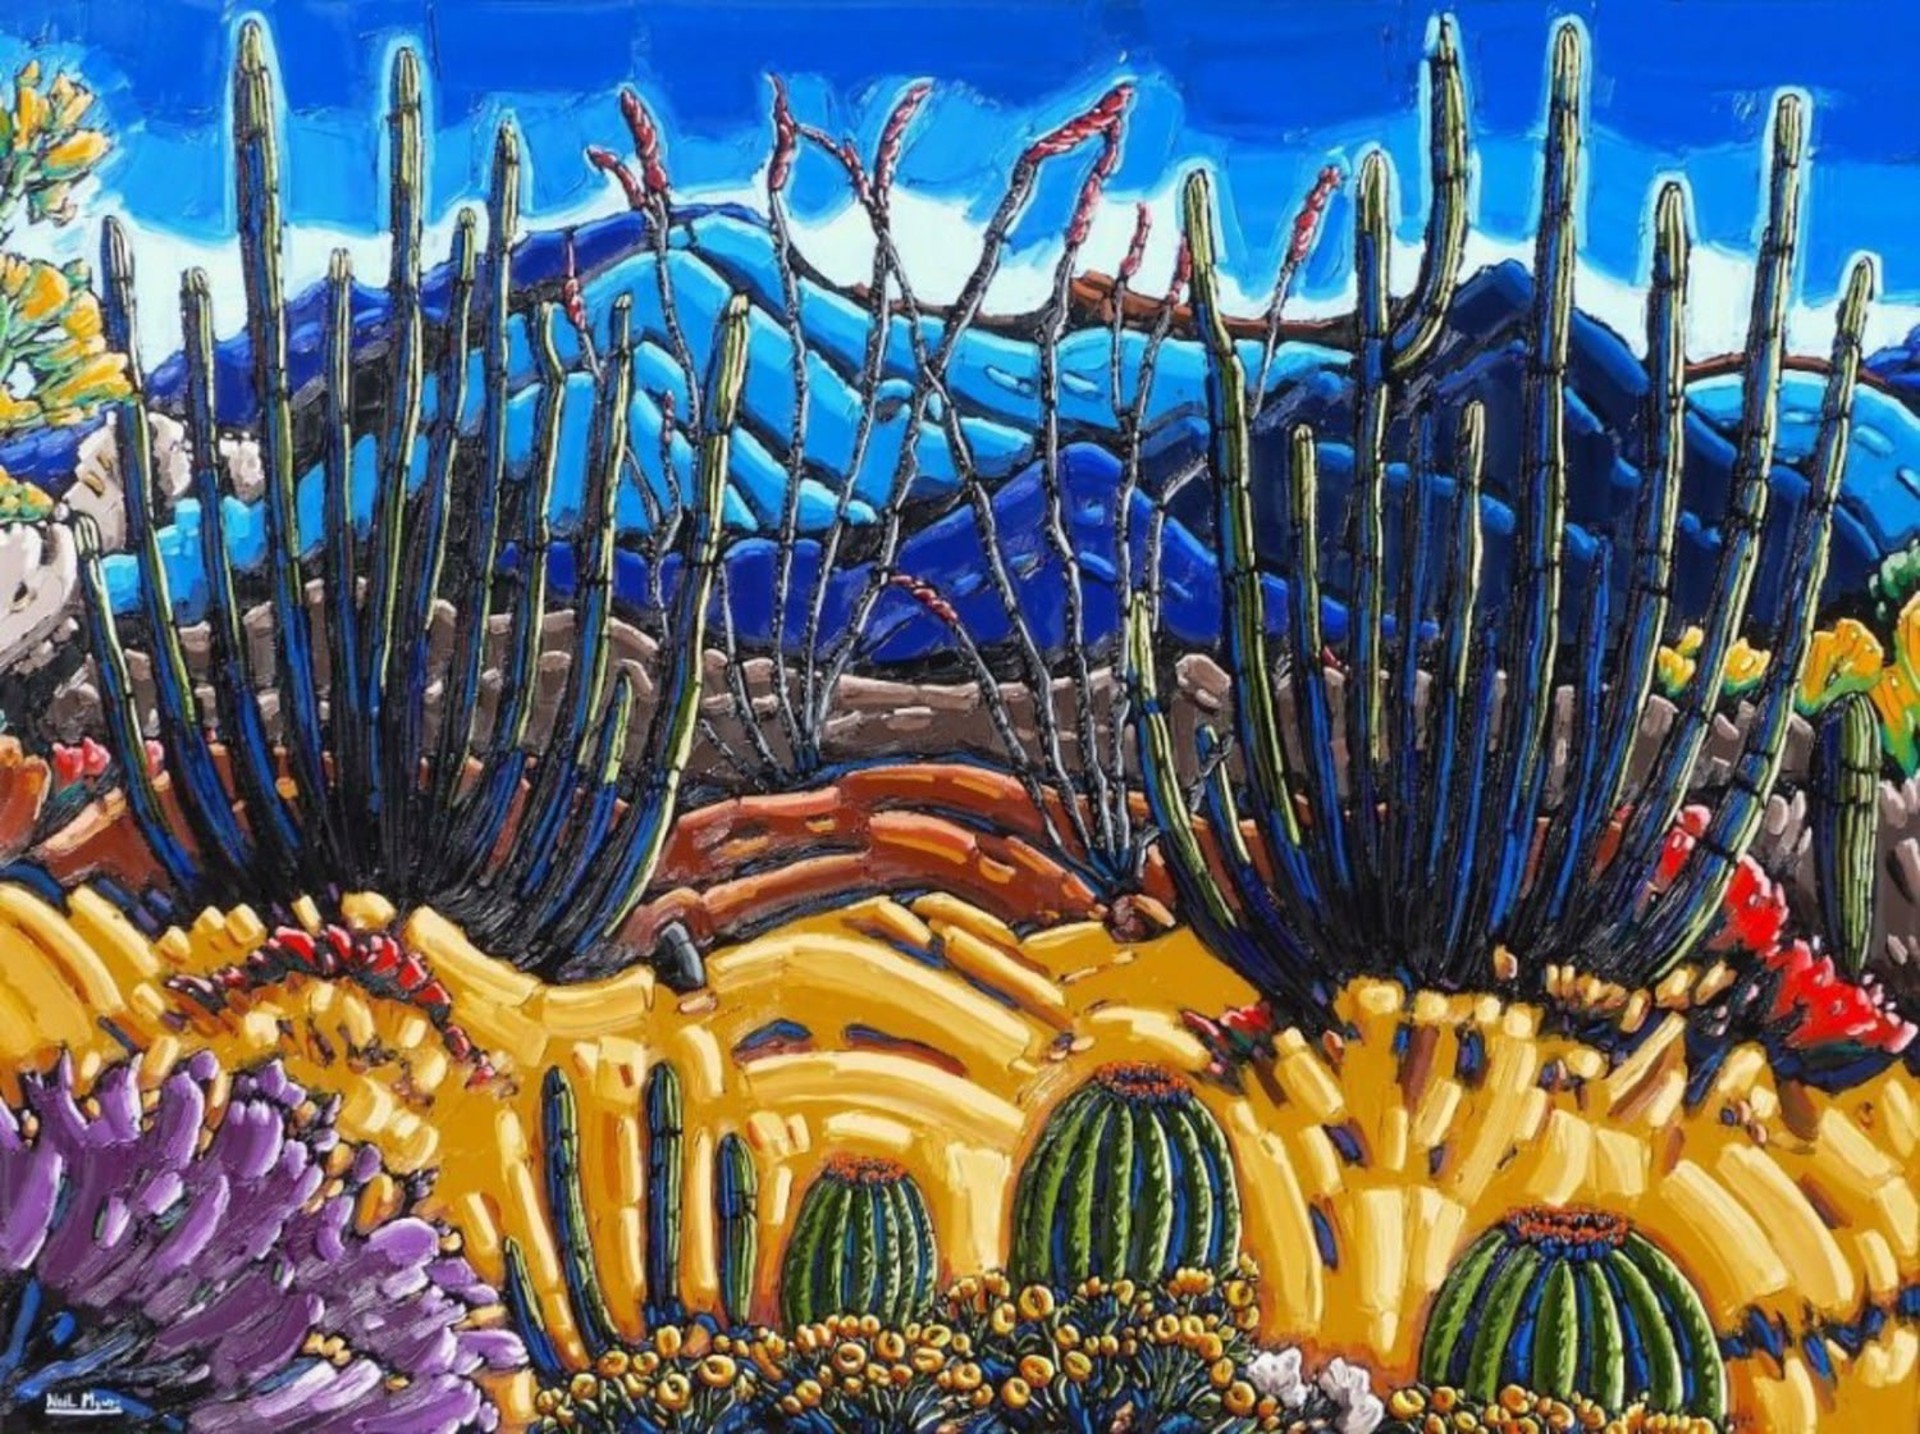 The Song of the Organ Pipes by Neil Myers